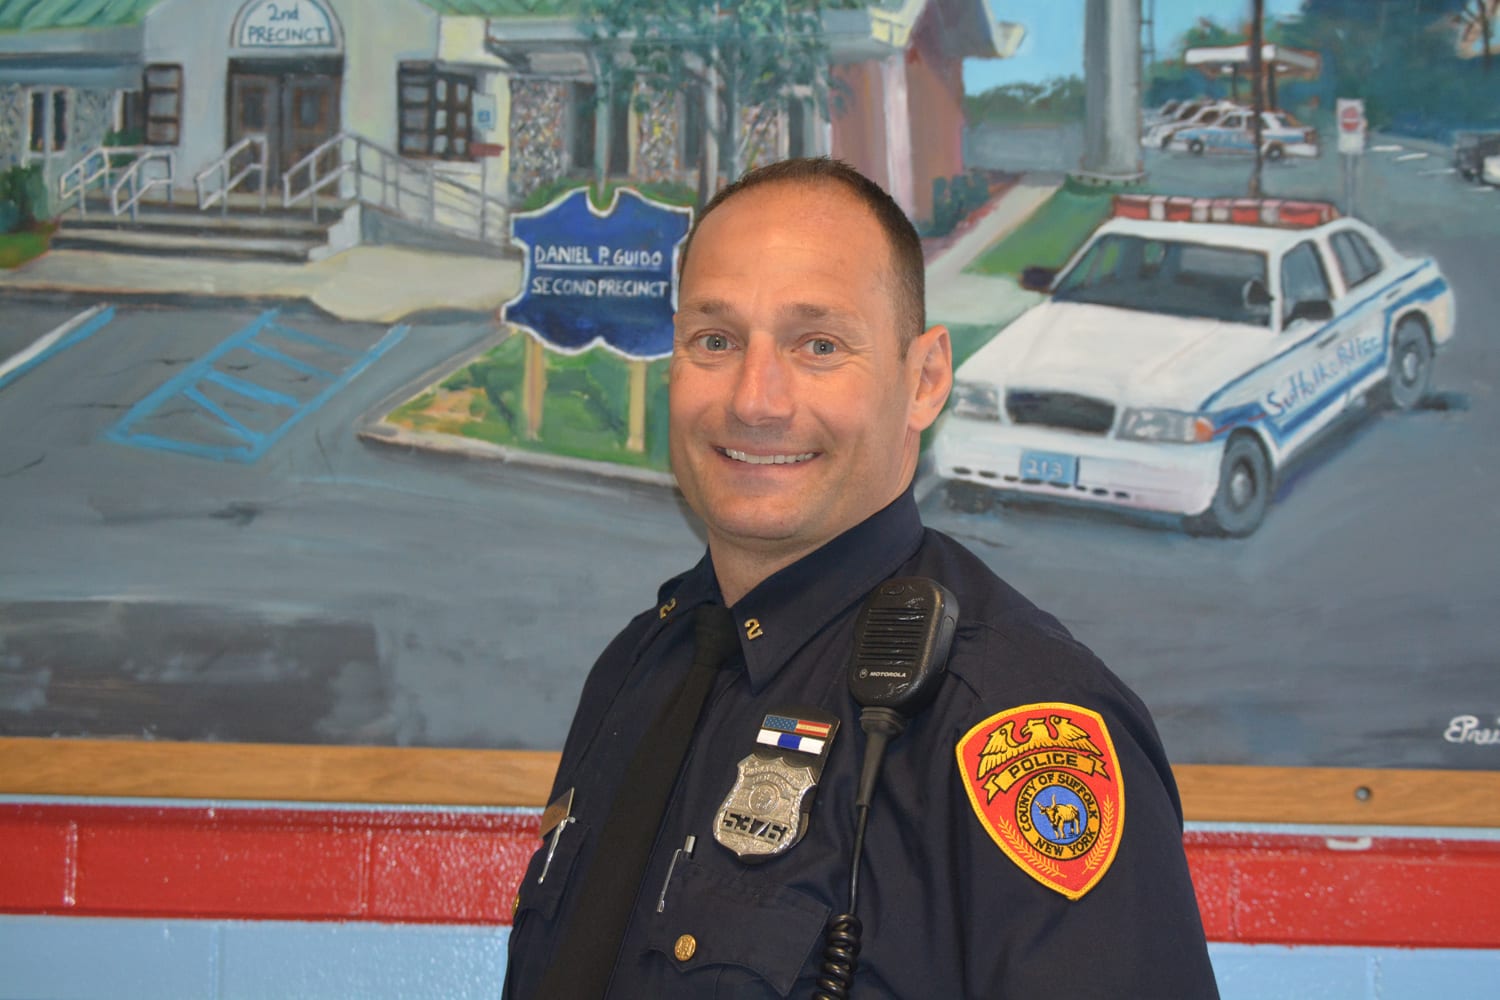 Suffolk cop is a resource for Huntington kids TBR News Media